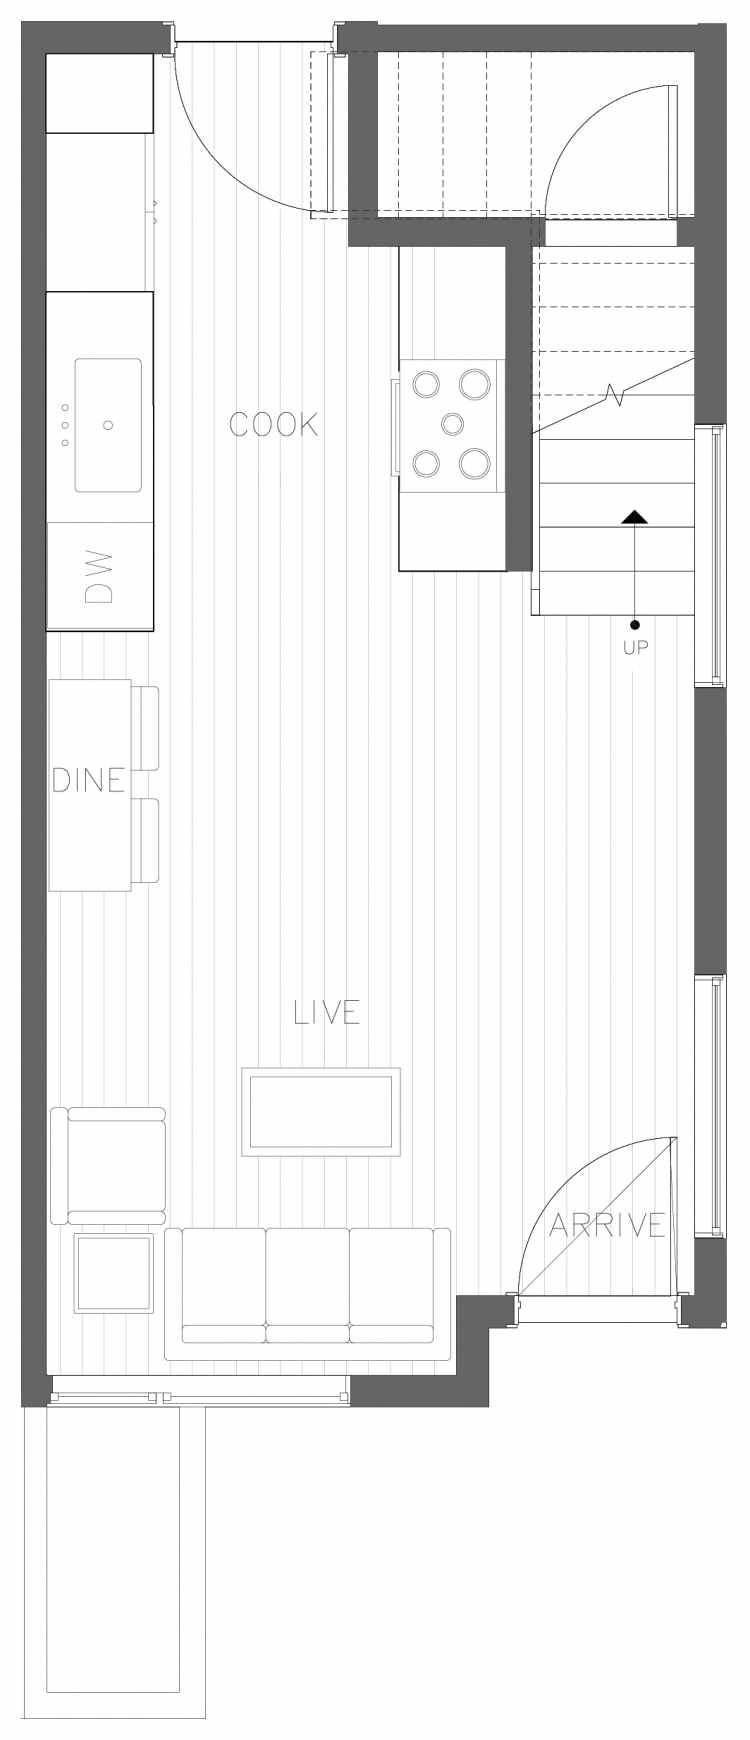 First Floor Plan of 1730A 11th Ave, One of the Altair Townhomes in Capitol Hill by Isola Homes